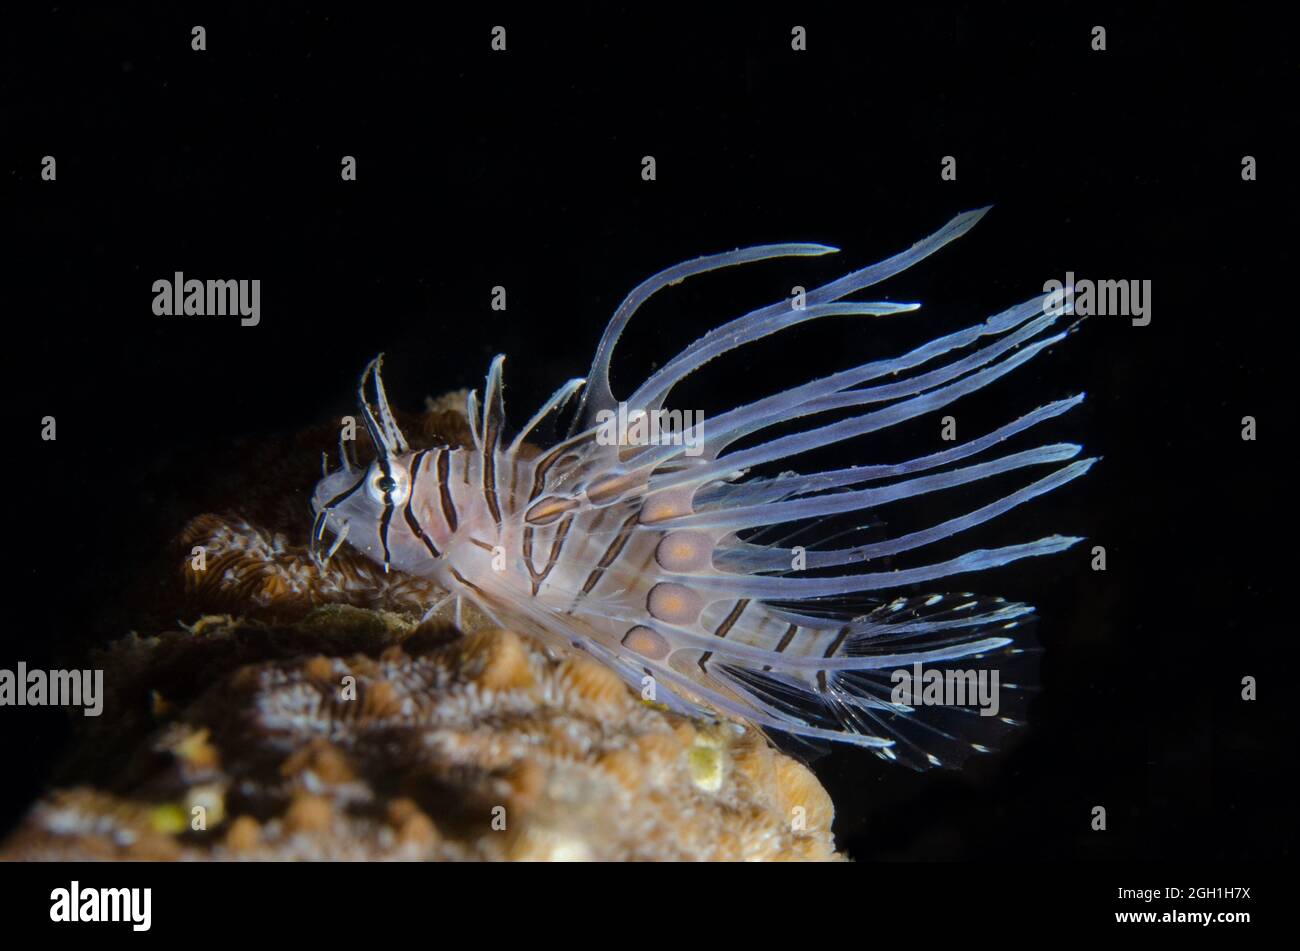 Juvenile Common Lionfish (Pterois volitans) with long fin filaments, Ghost Bay dive site, Amed, Karangasem Regency, Bali, Indonesia, Indian Ocean. Stock Photo